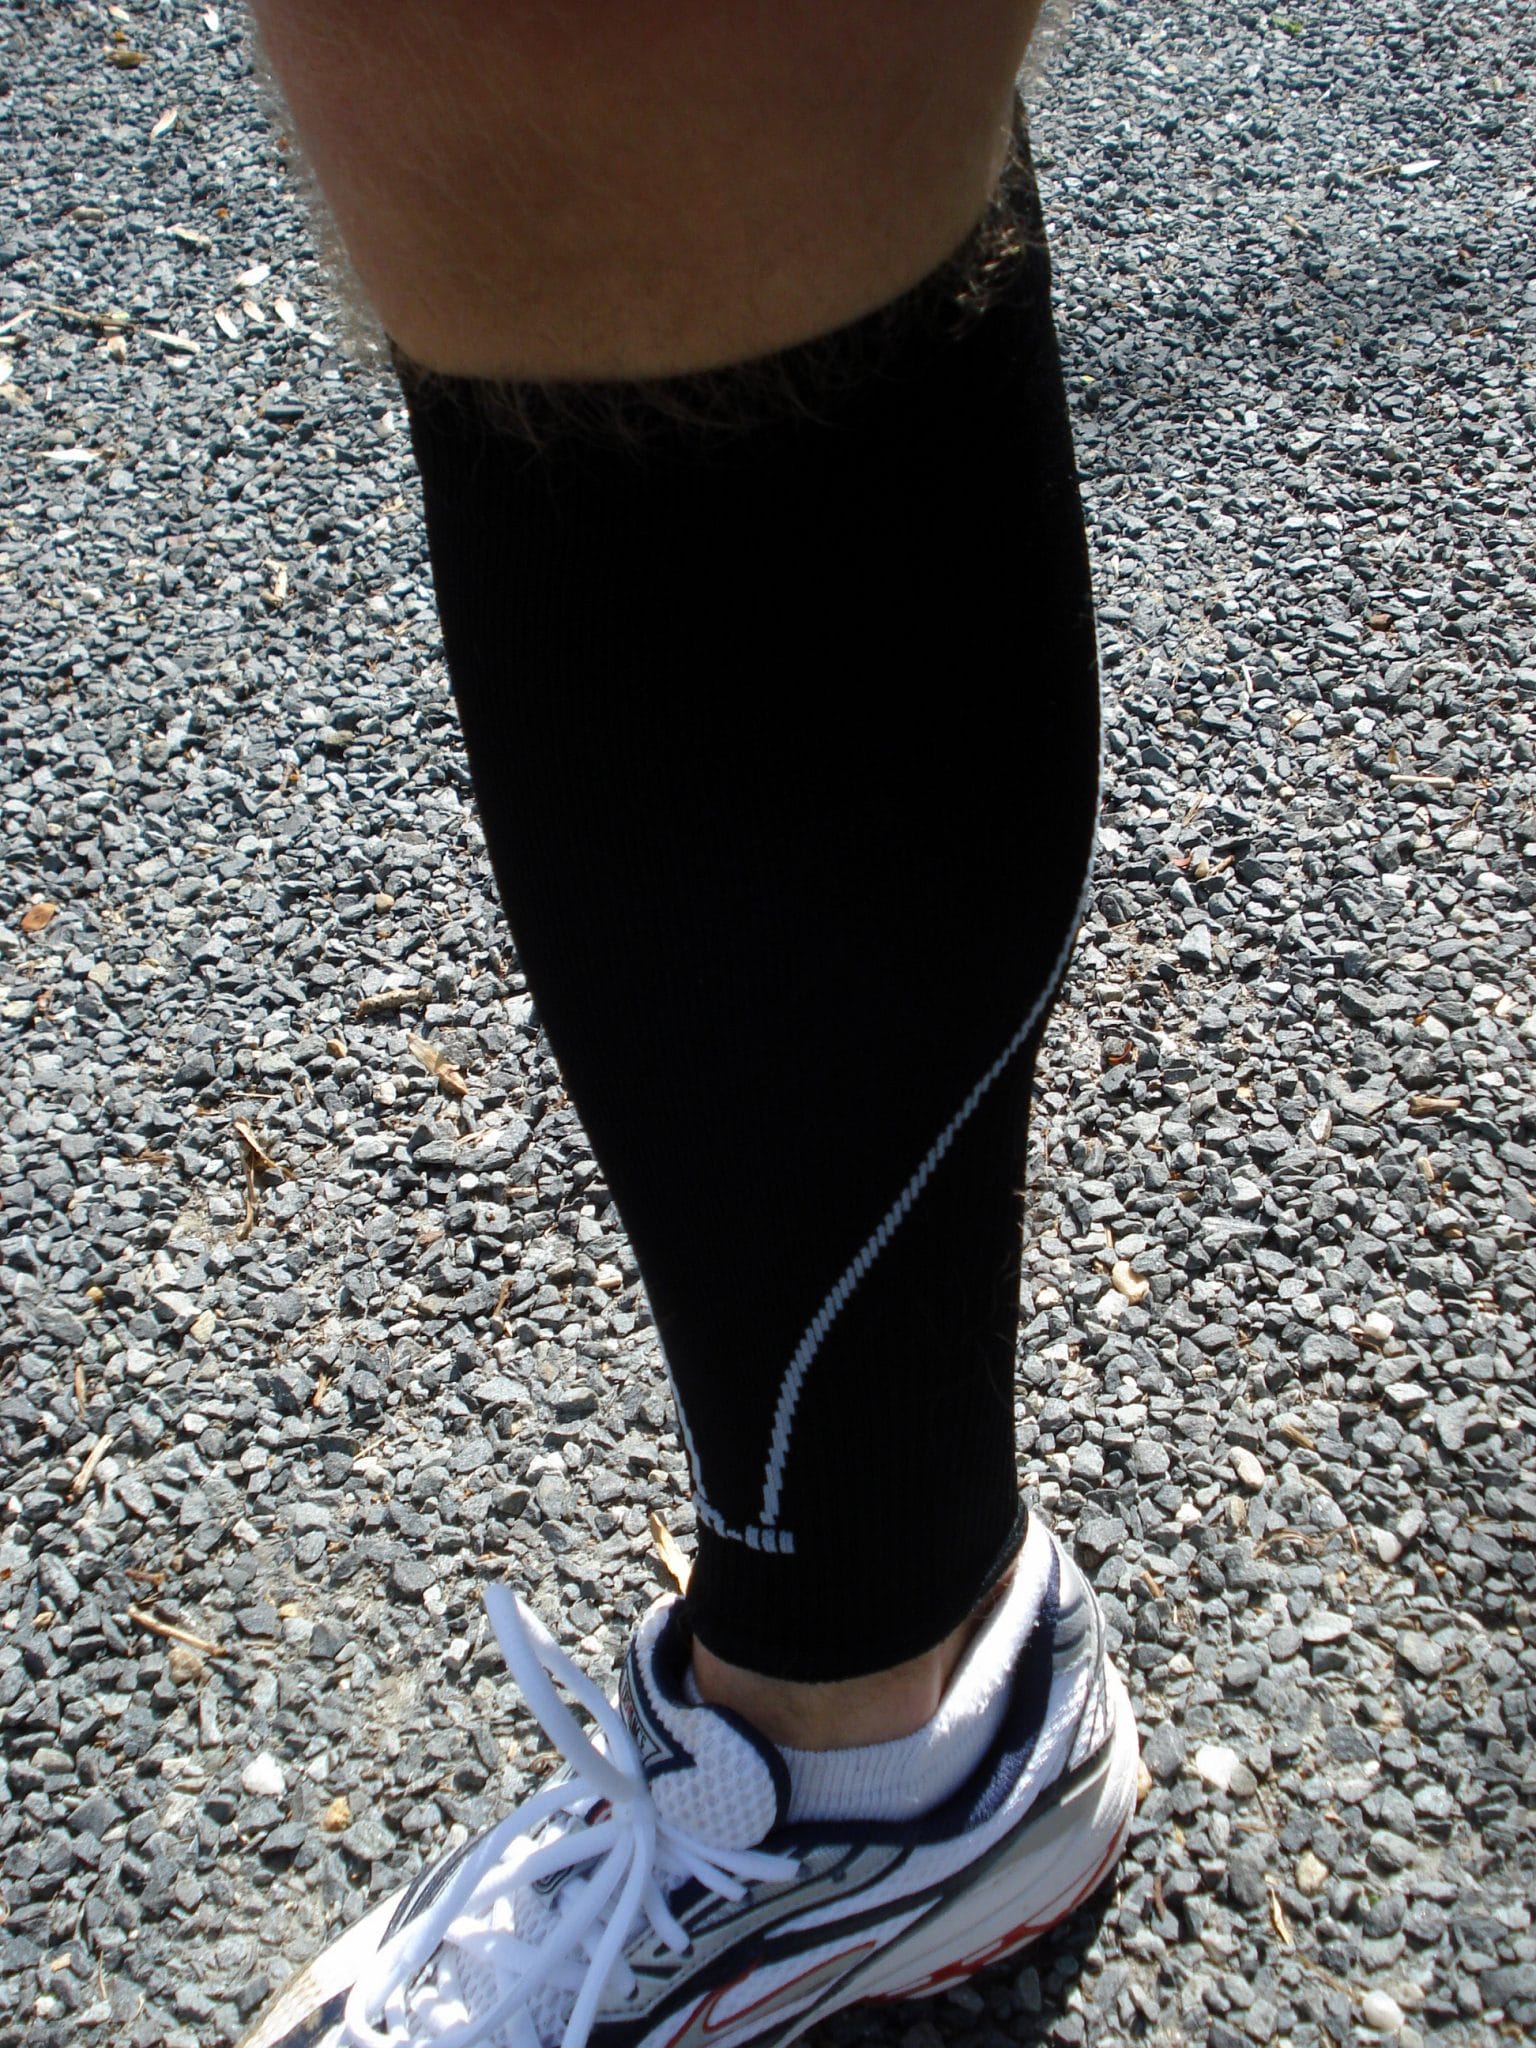 CEP Compression Socks: Buy Online, In-store